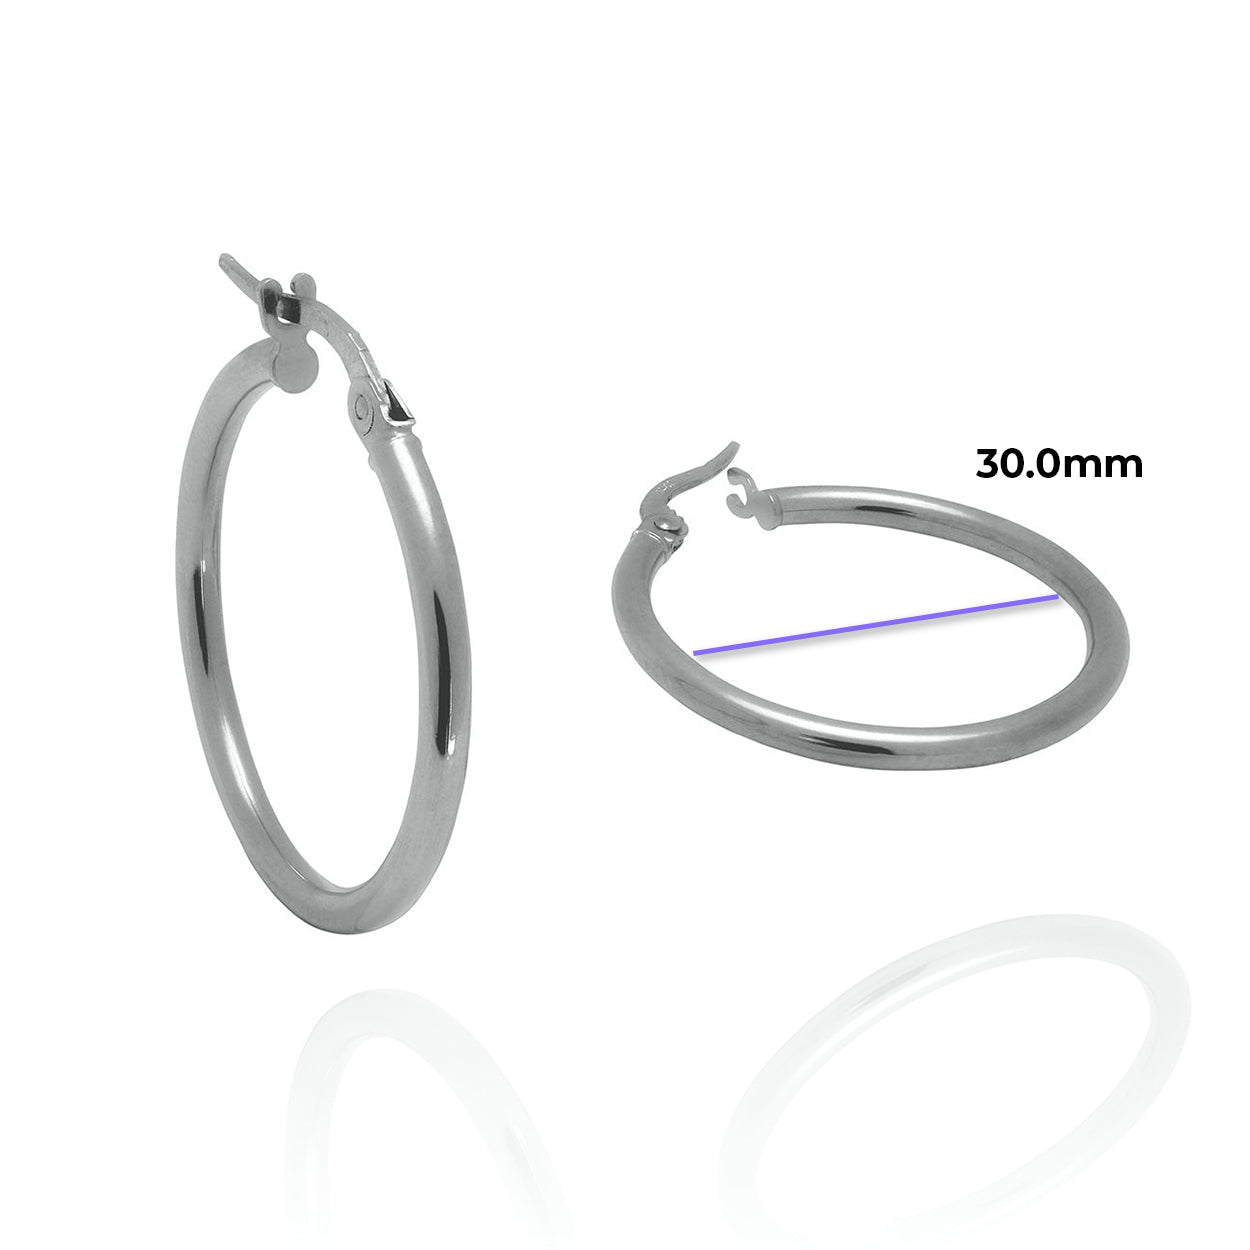 Large 2mm Tube Solid Gold Hoop Earrings White with Measurement 30.0mm